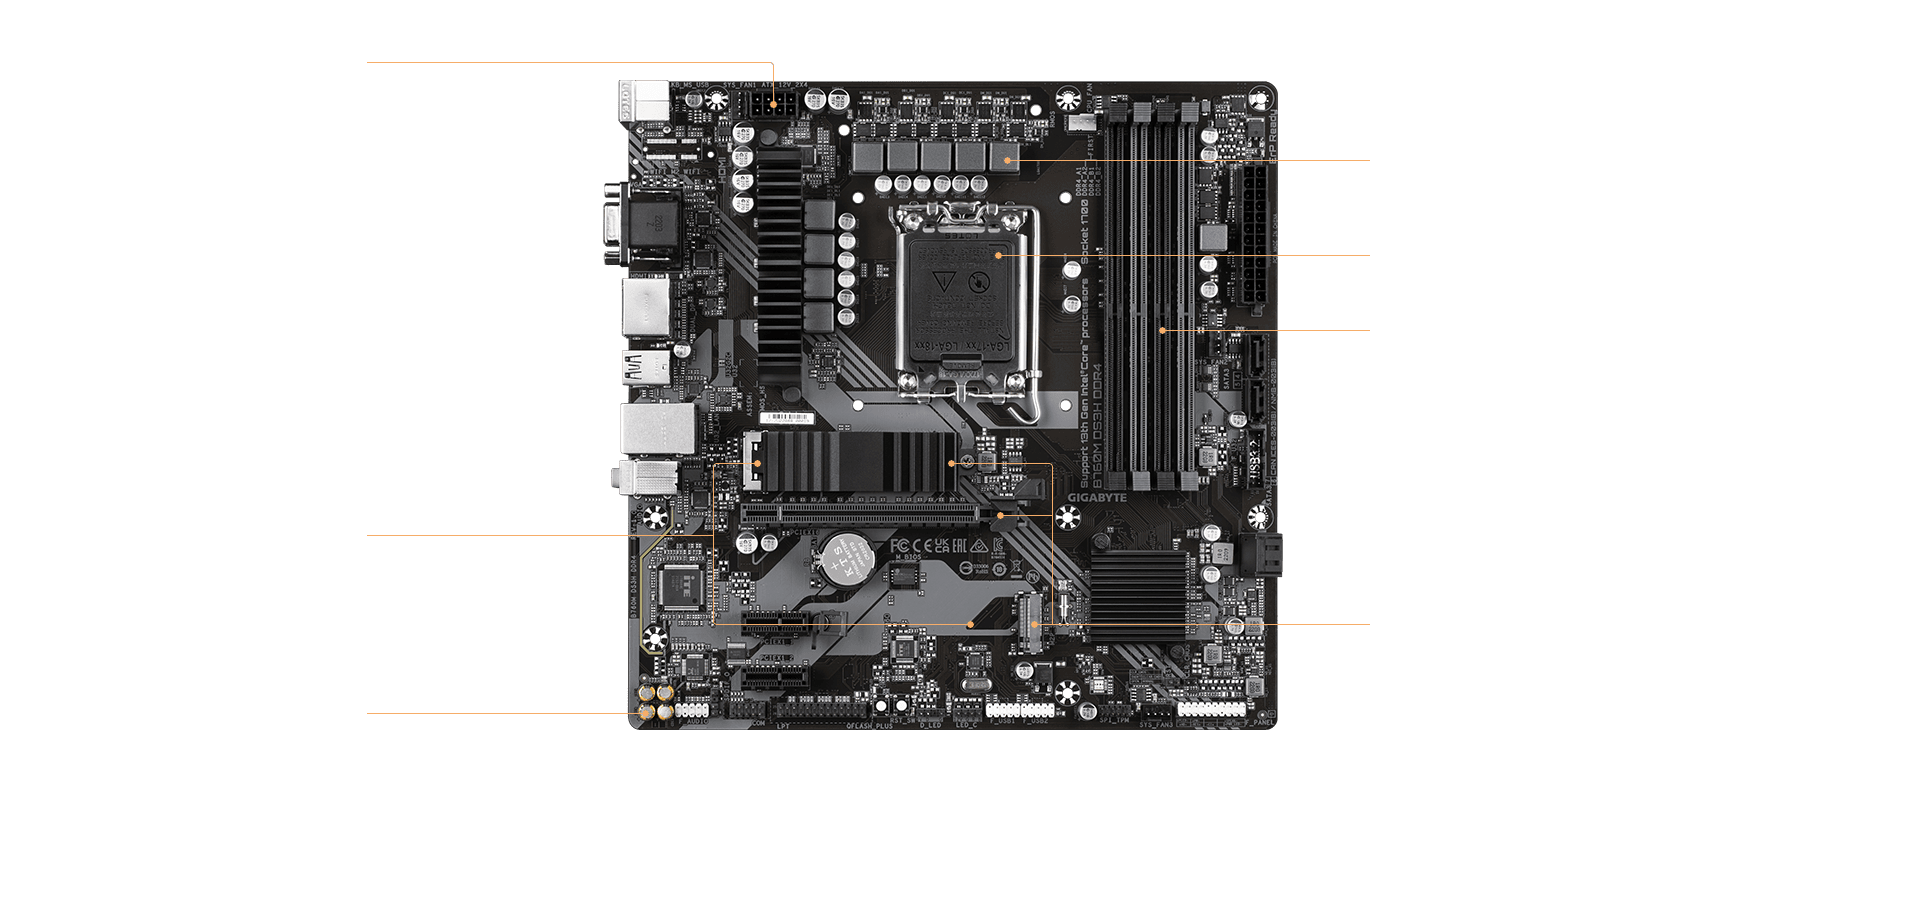 B760M DS3H DDR4 (rev. 1.0) Key Features | Motherboard - GIGABYTE